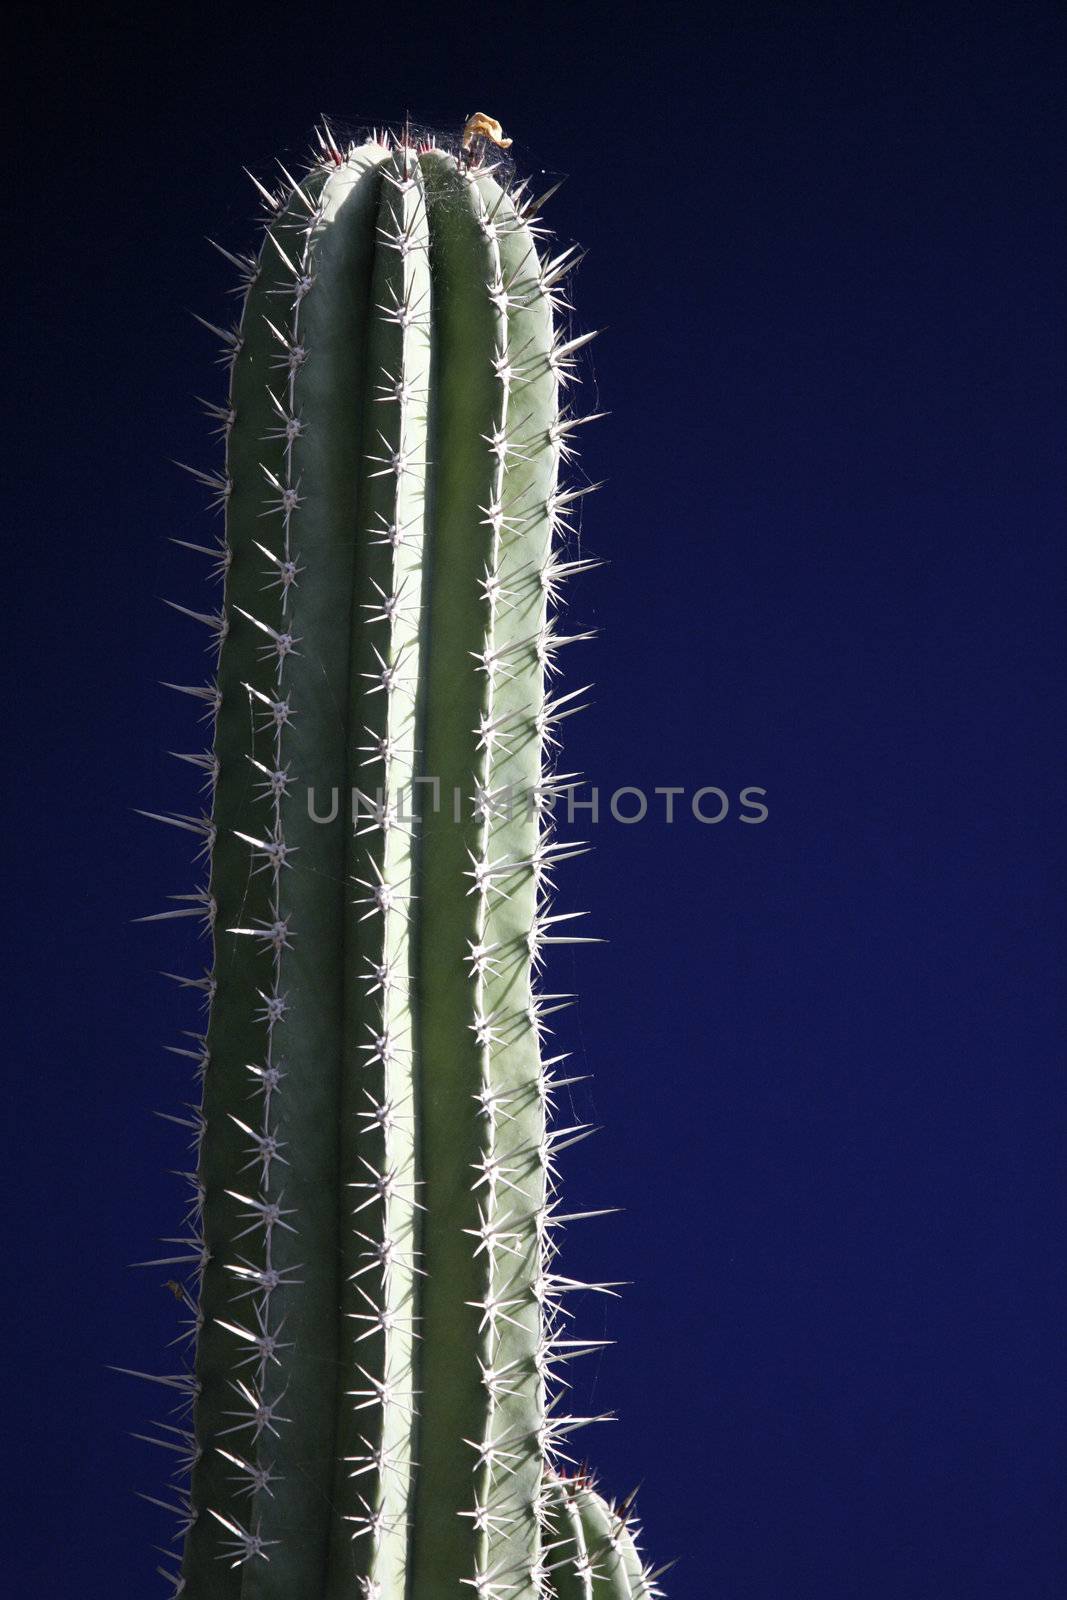 cactus with blue background by quintanilla